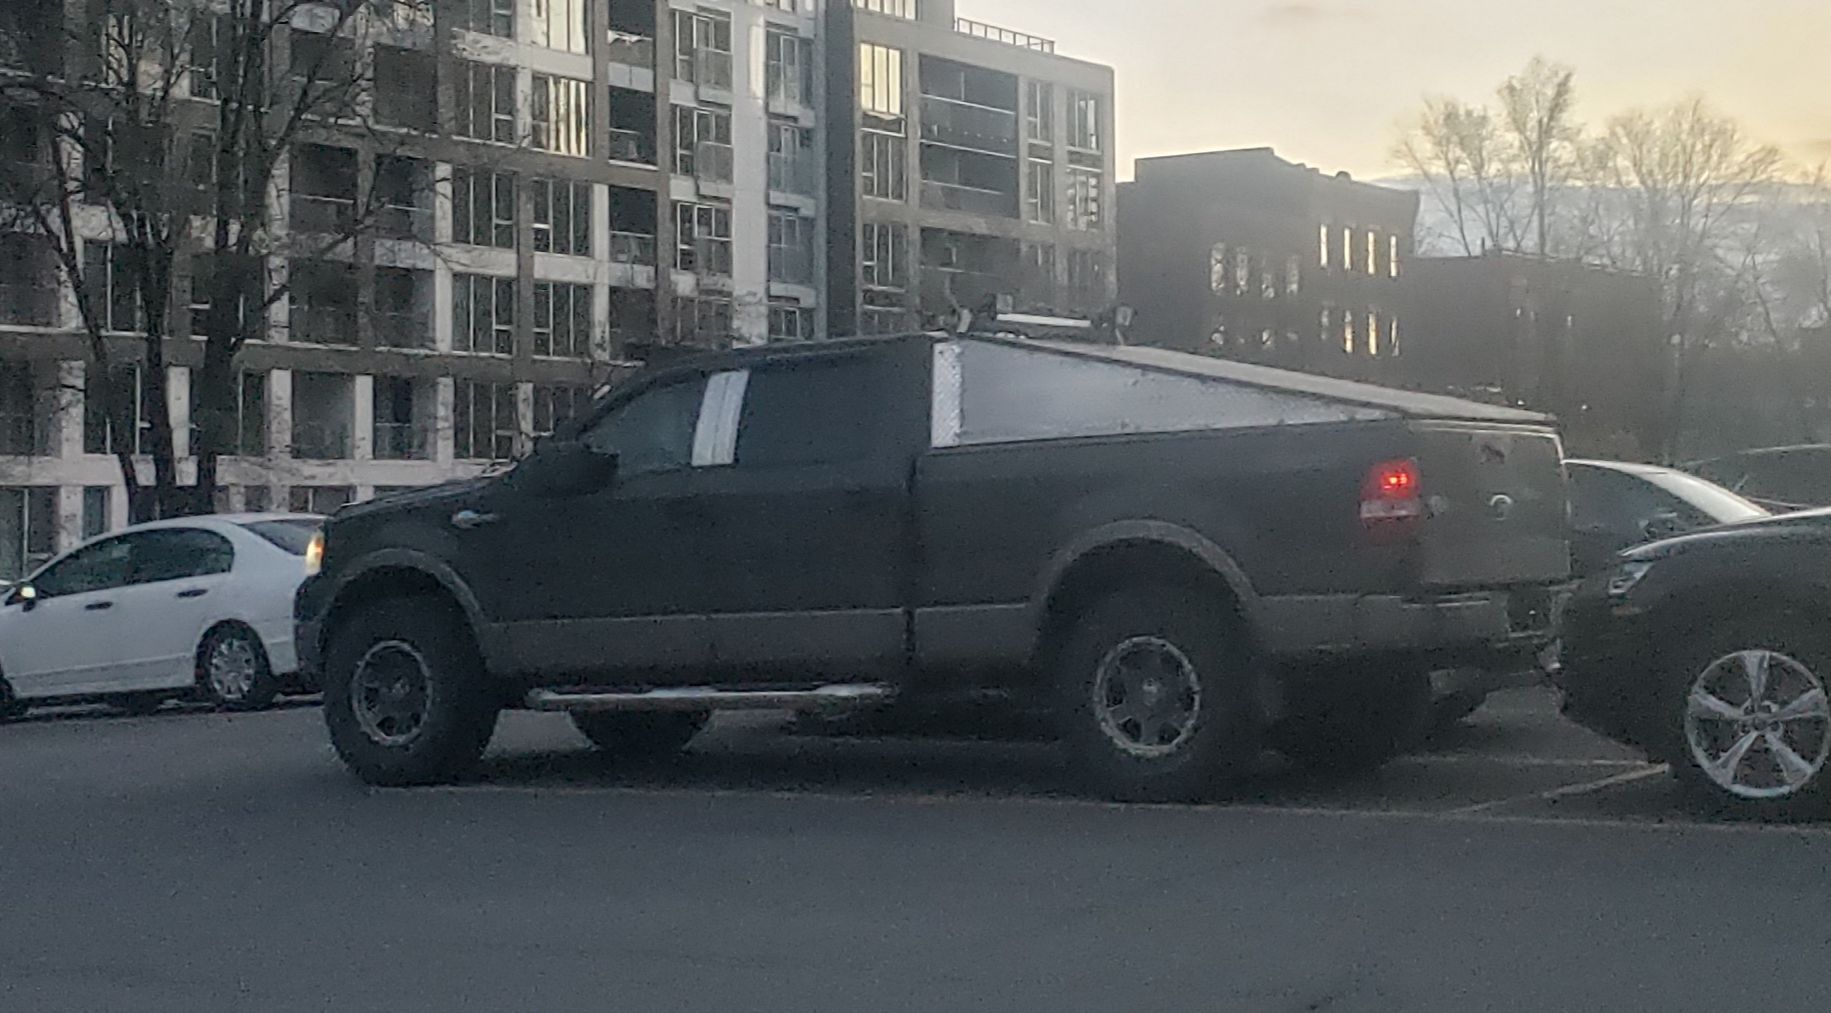 Saw my first cybertruck today